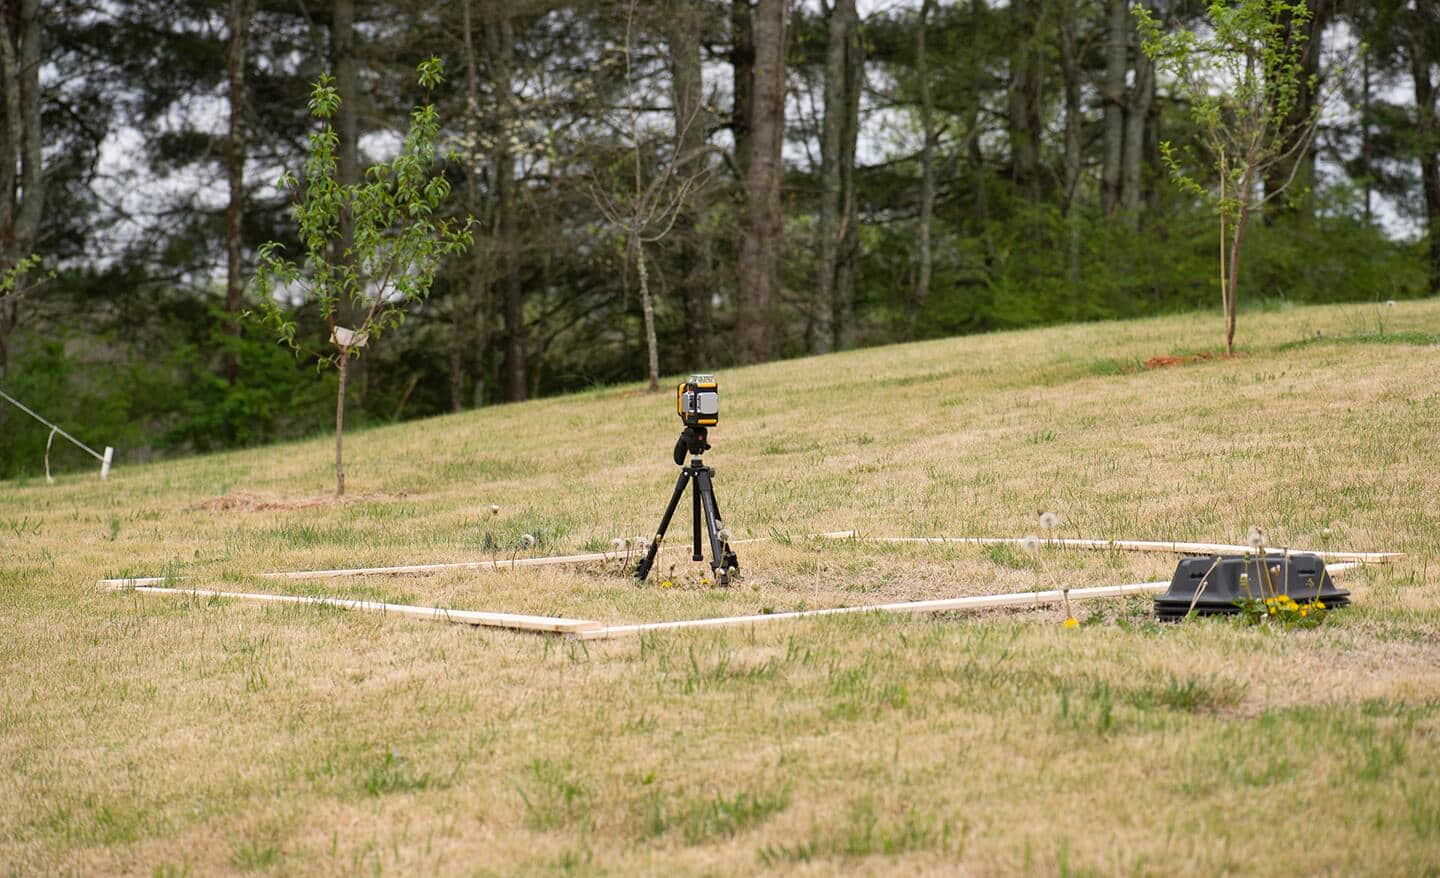 A laser level is used to find and adjust the elevation of the ground.